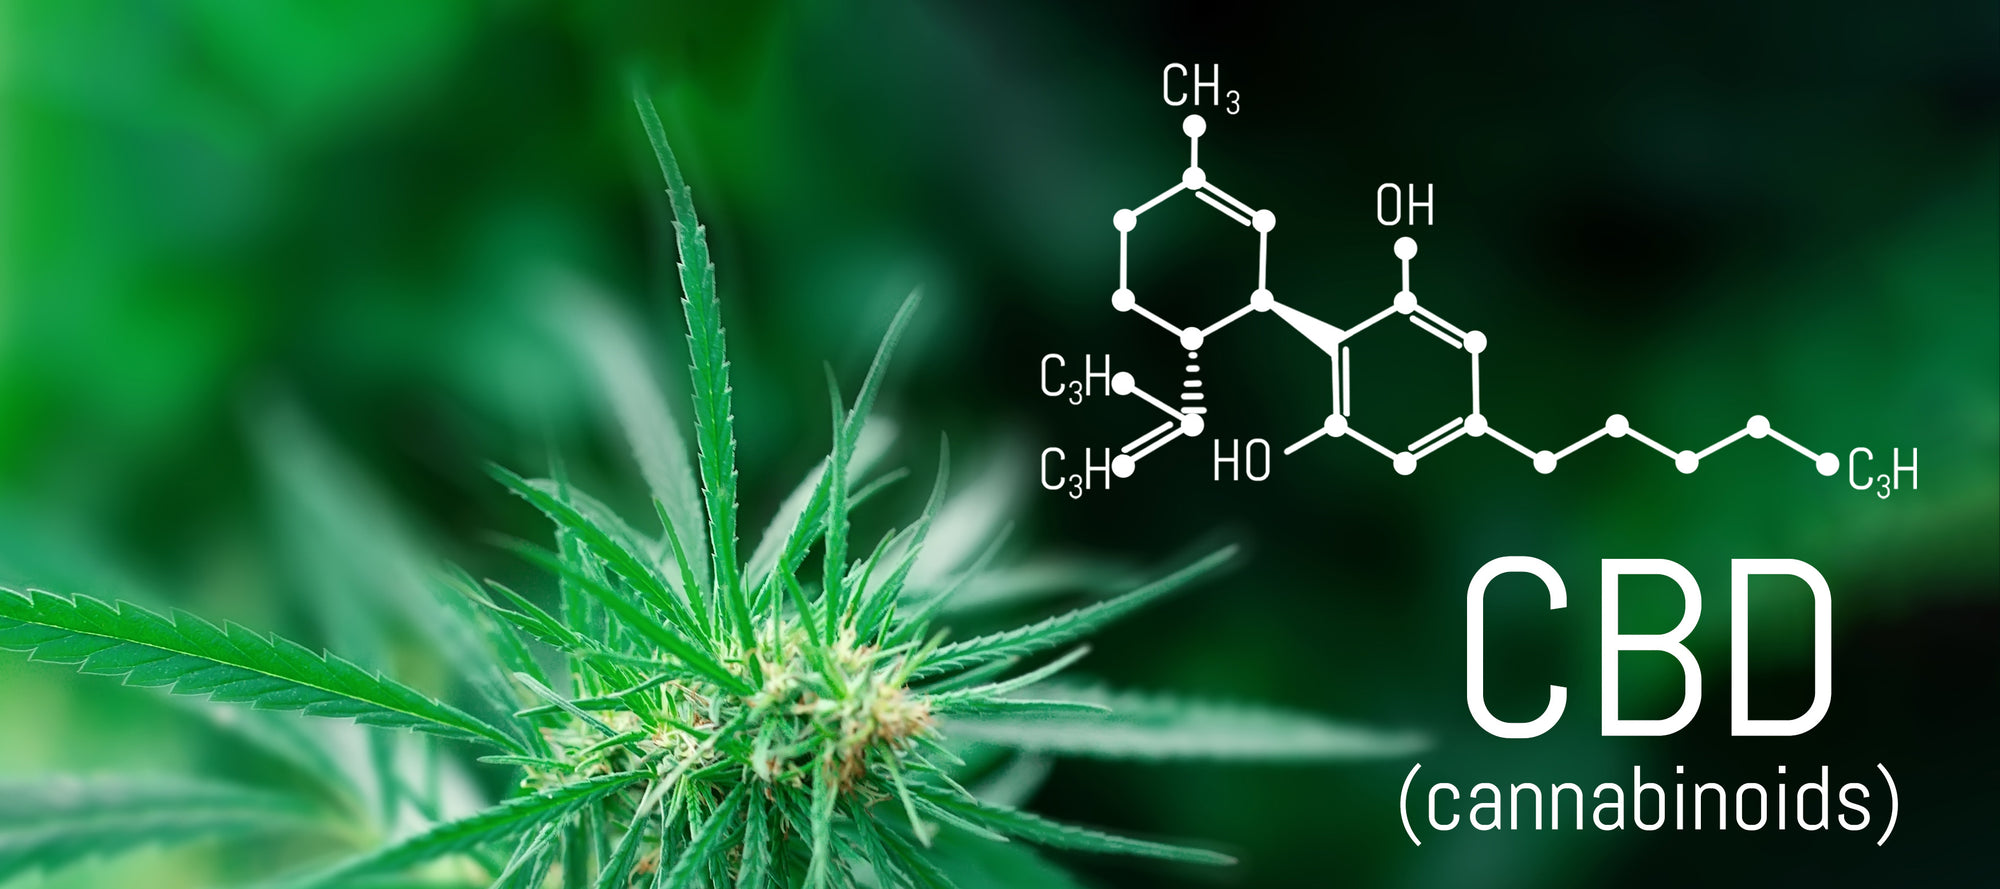 Industrial Hemp CBD vs Marijuana CBD: What’s the difference and what exactly is legal to sell?